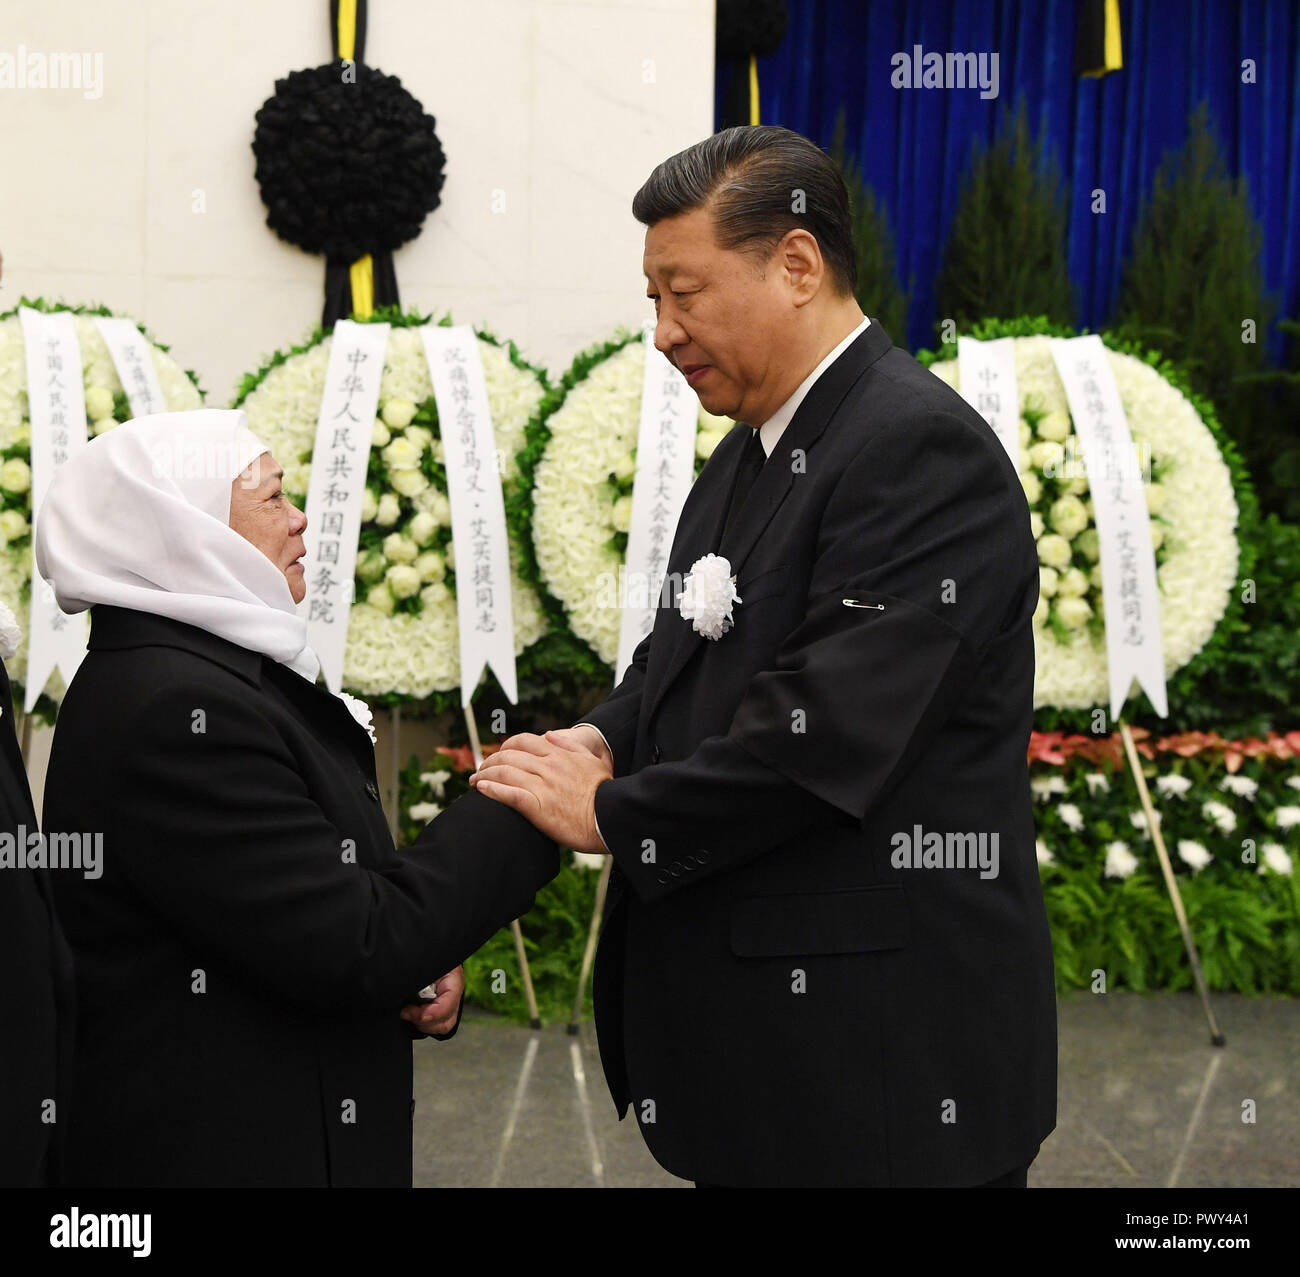 (181018) -- BEIJING, Oct. 18, 2018 (Xinhua) -- Chinese President Xi Jinping (R) extends condolence to the family of the late Ismail Amat, vice chairperson of the Standing Committee of the 10th National People's Congress, at the Babaoshan Revolutionary Cemetery in Beijing, capital of China, Oct. 18, 2018. The funeral of Ismail Amat was held Thursday in Beijing. Ismail Amat, also vice chairperson of the 7th National Committee of the Chinese People's Political Consultative Conference and former state councilor, passed away due to illness at the age of 84 in Beijing on Oct. 16. Xi Jinping Stock Photo